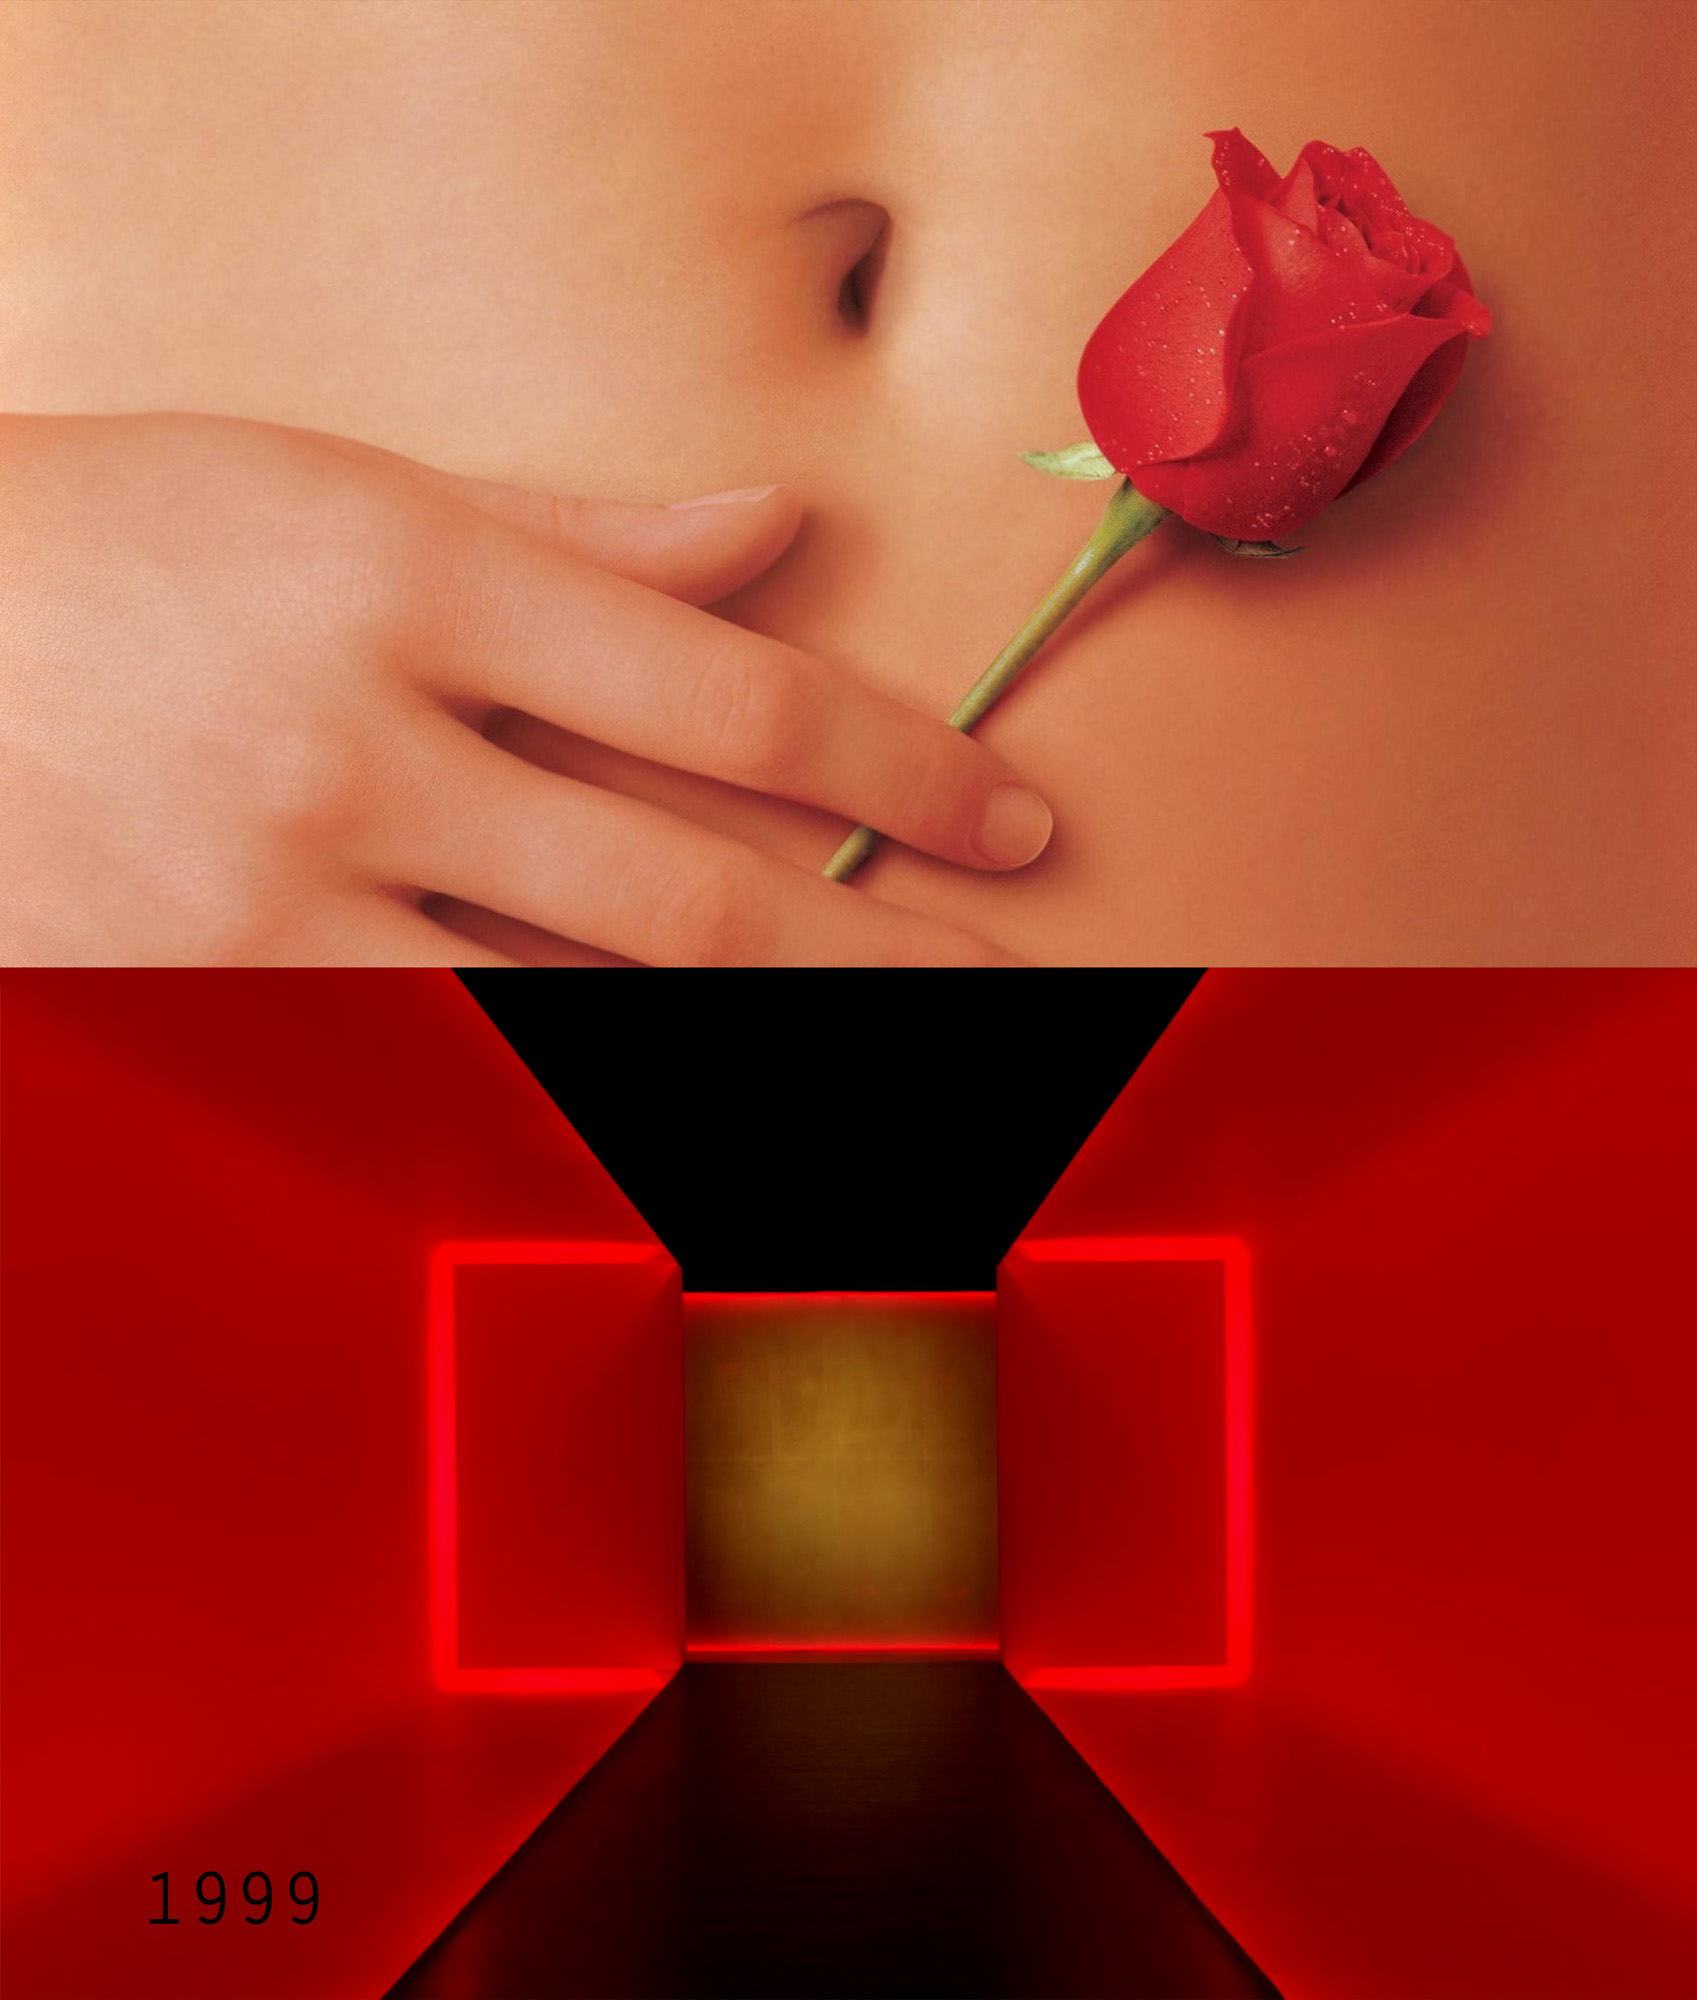 1999 film American Beauty with "The Light Inside" by James Turrell - by Bonnie Lautenberg